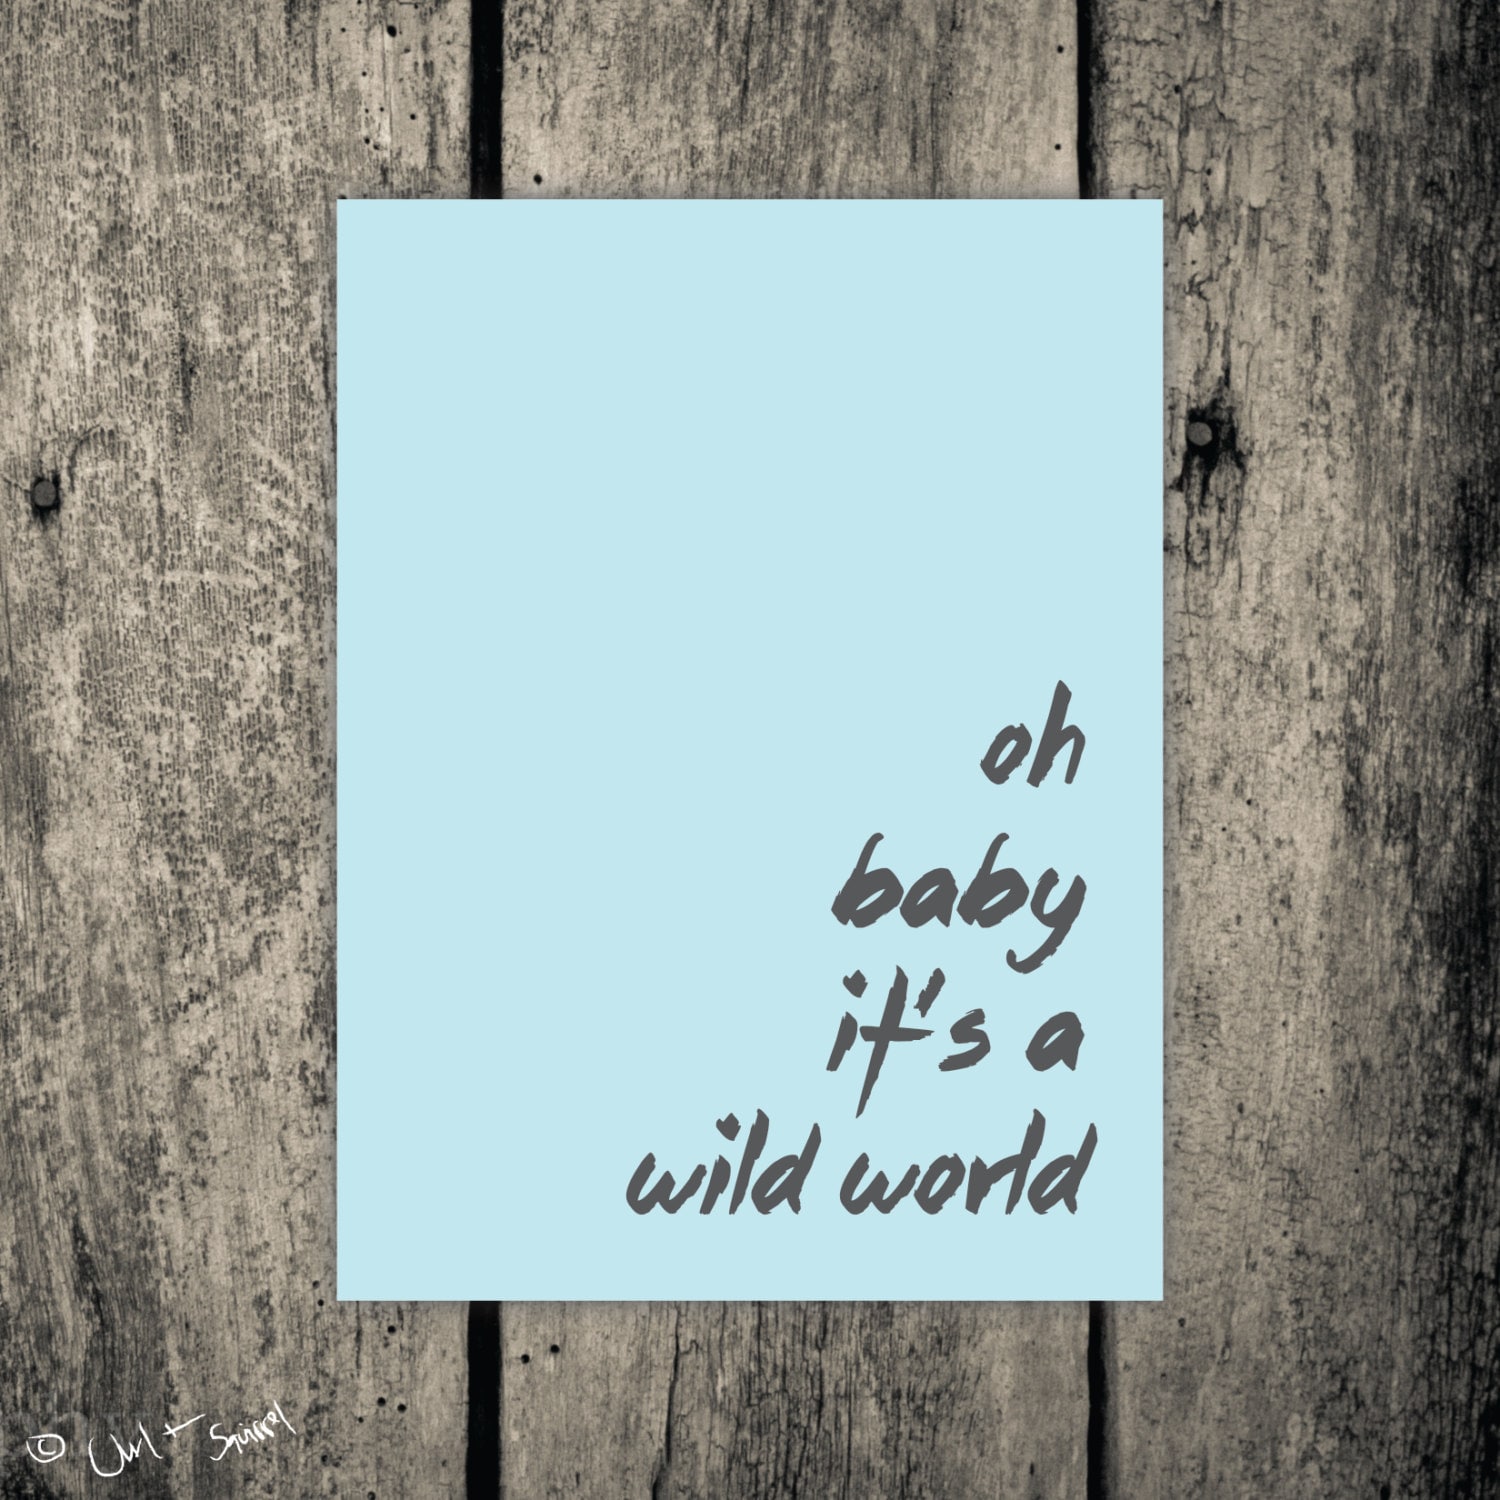 Quote printable oh baby it's a wild world by owlandsquirrel